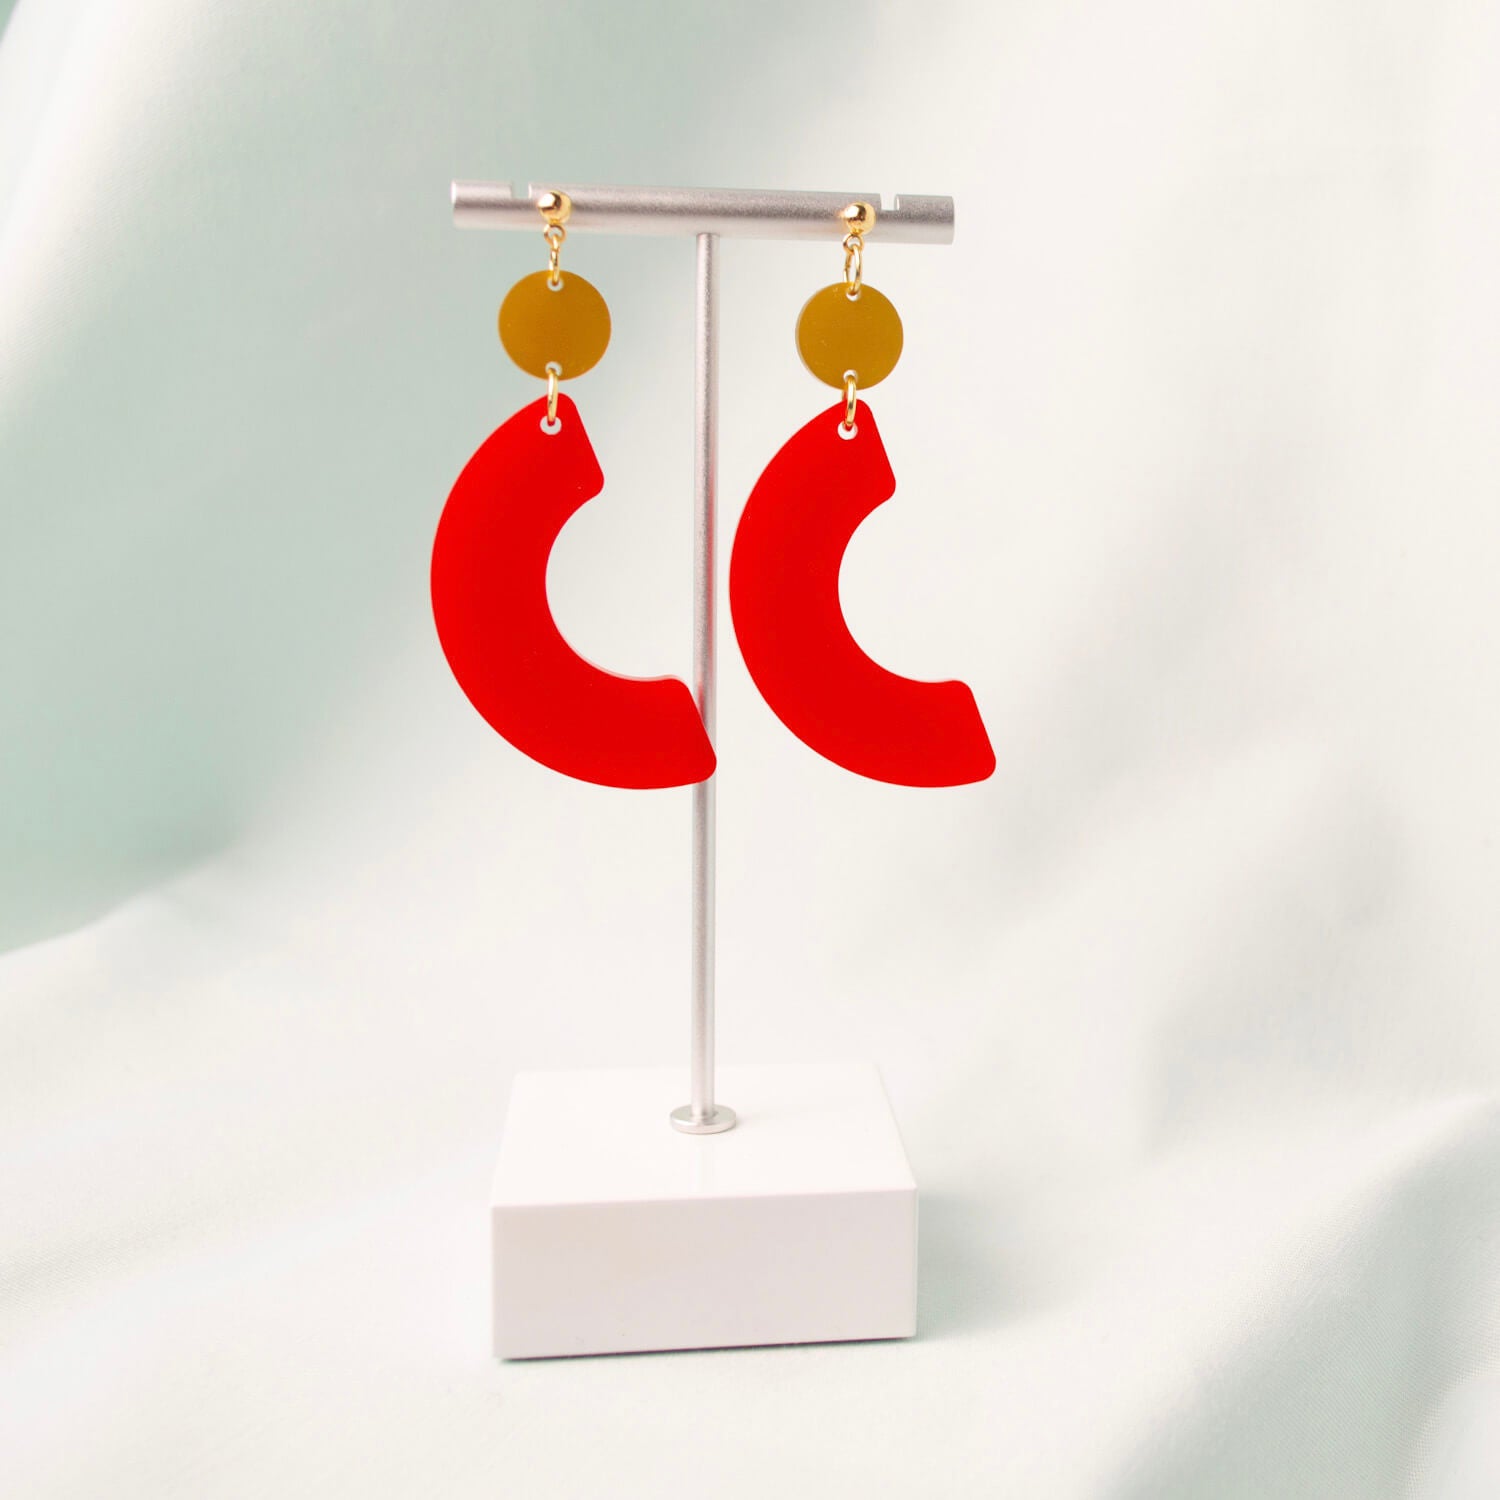 Laser cut satin solid red and satin solid gold plexiglass earrings